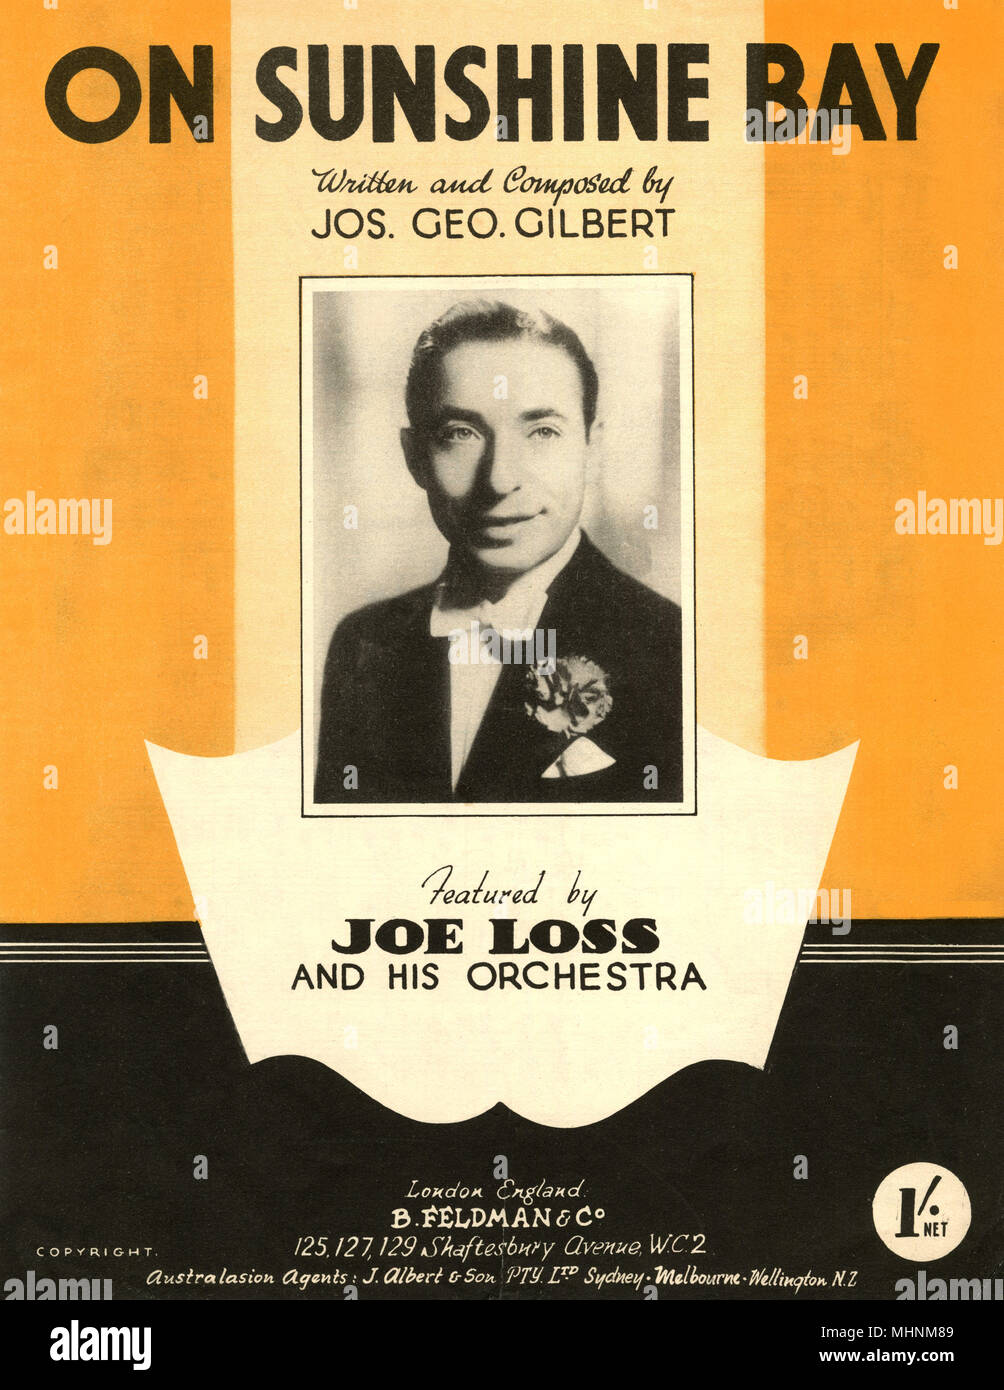 'On Sunshine Bay' - Music Sheet Cover written and composed by Jos. Geo. Gilbert, featured by Joe Loss and his orchestra. An illustration with an photo of Joe Loss in the middle.     Date: circa 1946 Stock Photo